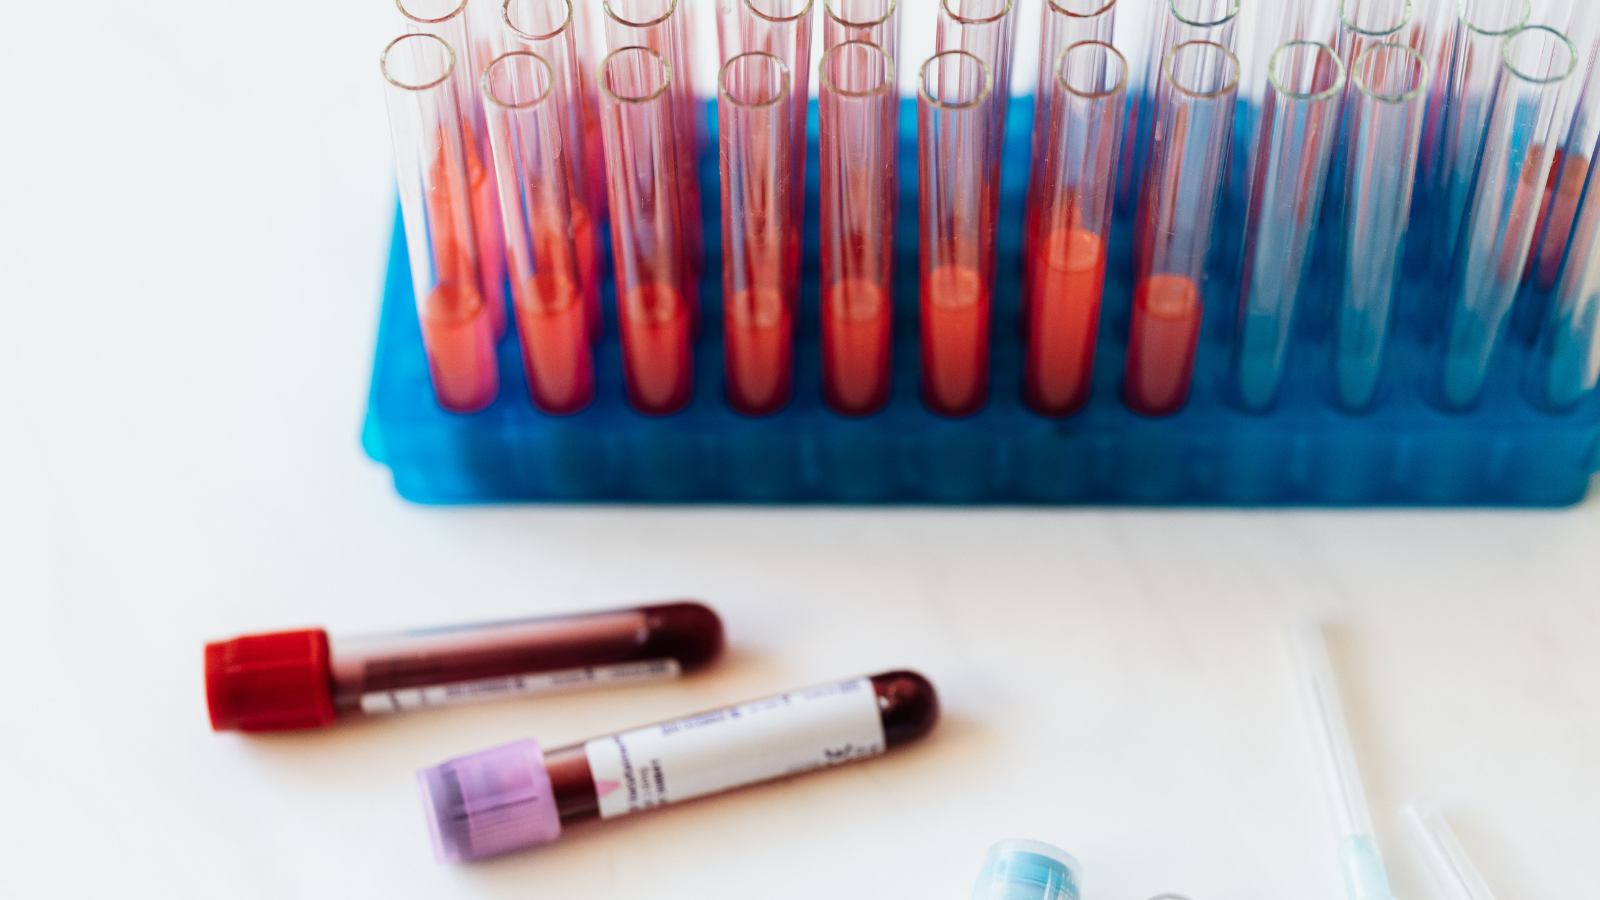 Research in biomarkers published in Blood Journal